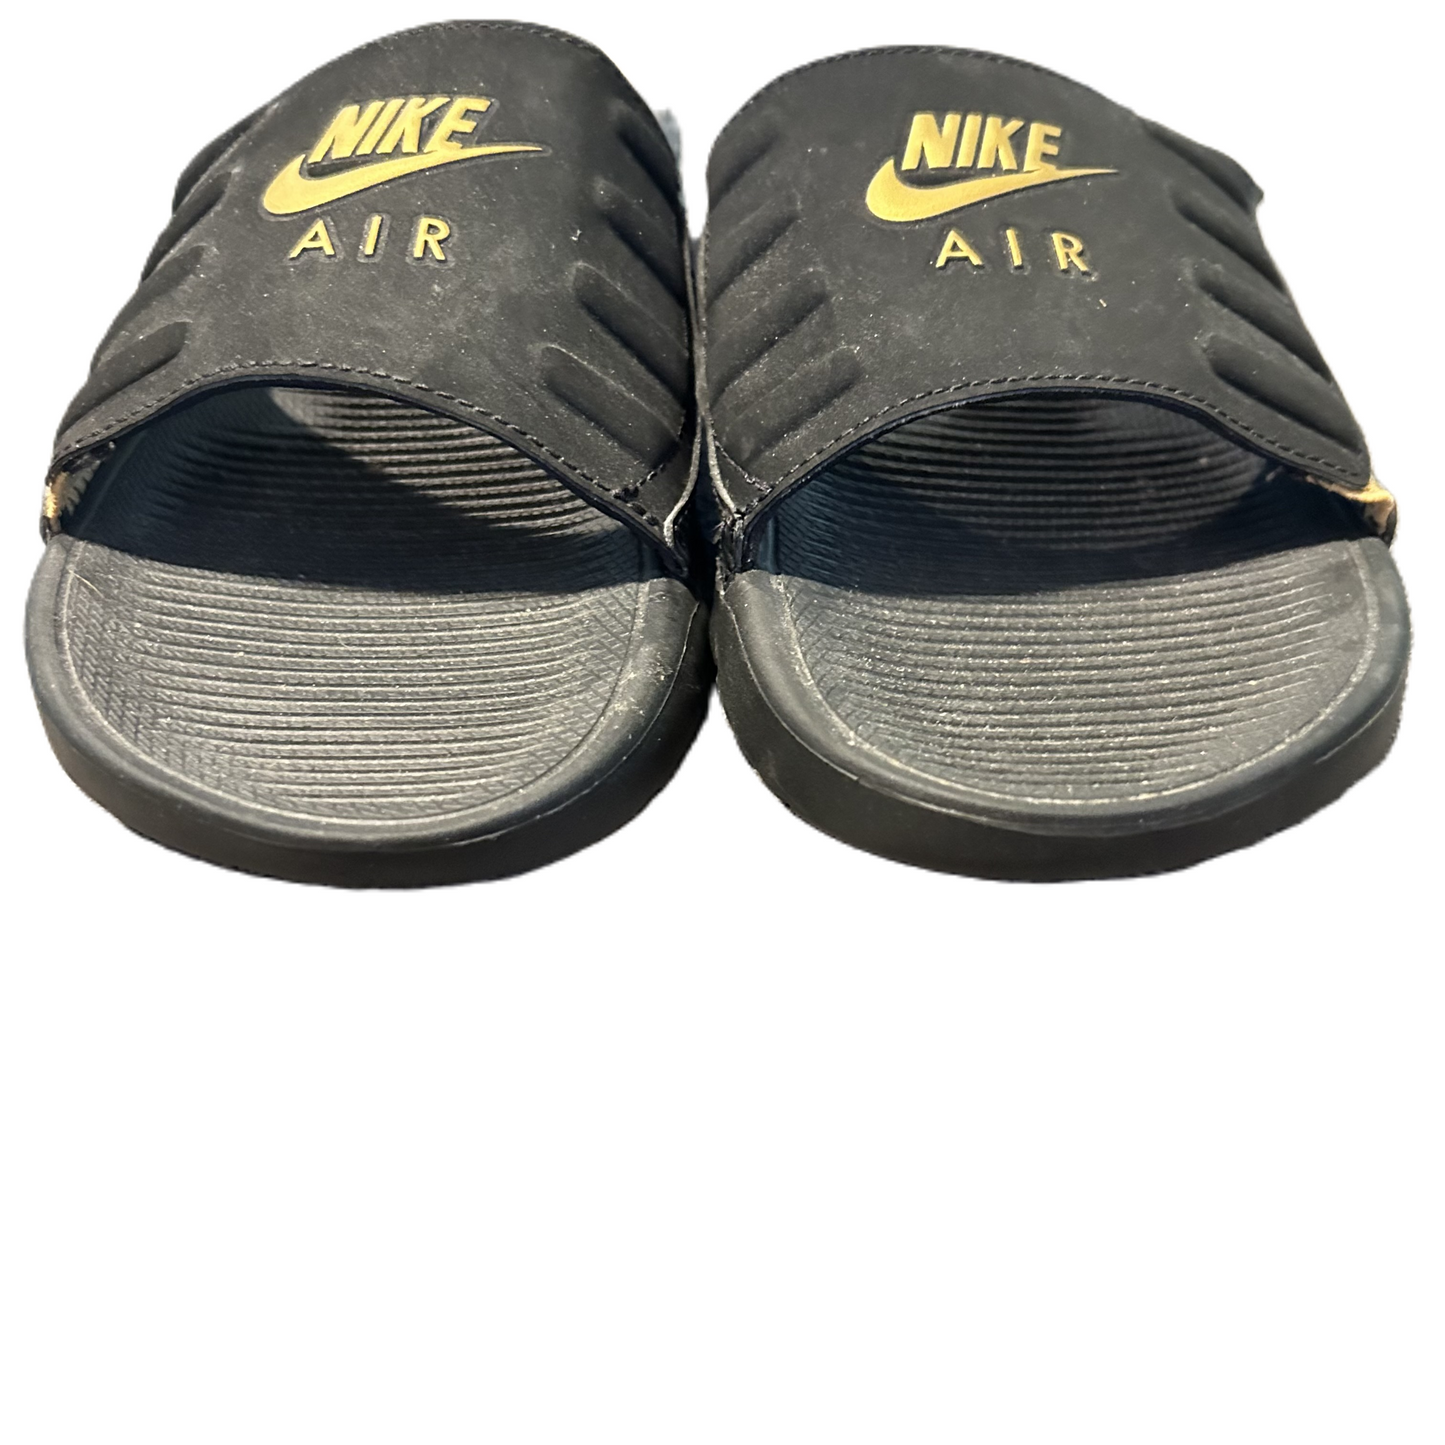 Black & Gold Sandals Flats By Nike, Size: 8